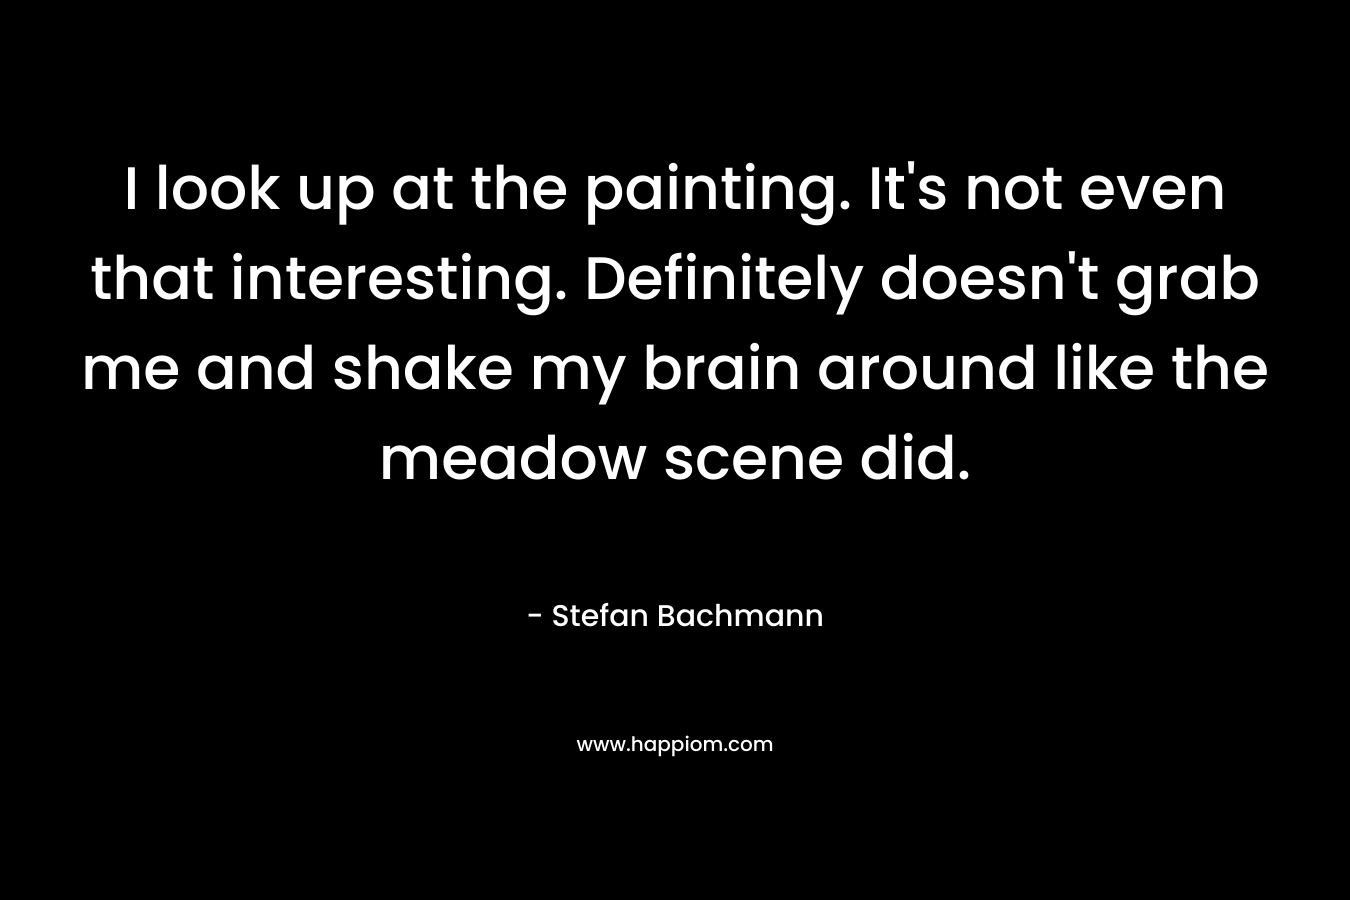 I look up at the painting. It's not even that interesting. Definitely doesn't grab me and shake my brain around like the meadow scene did.